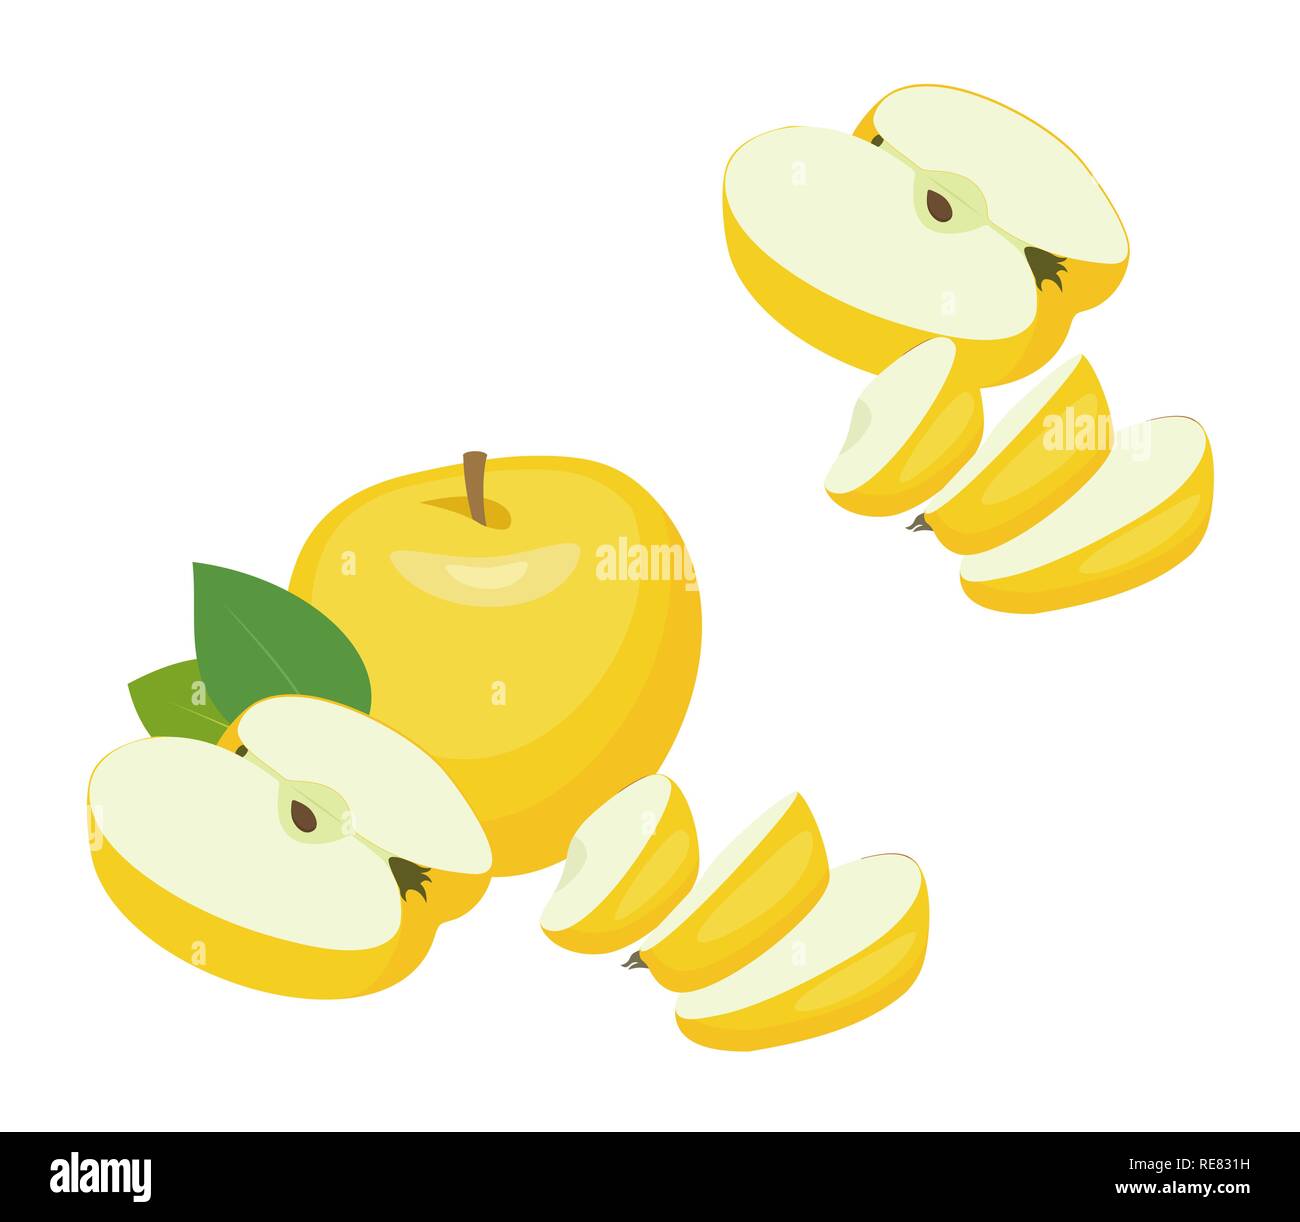 Apples with half apple and slices. Vector illustration isolated on white background. Stock Vector